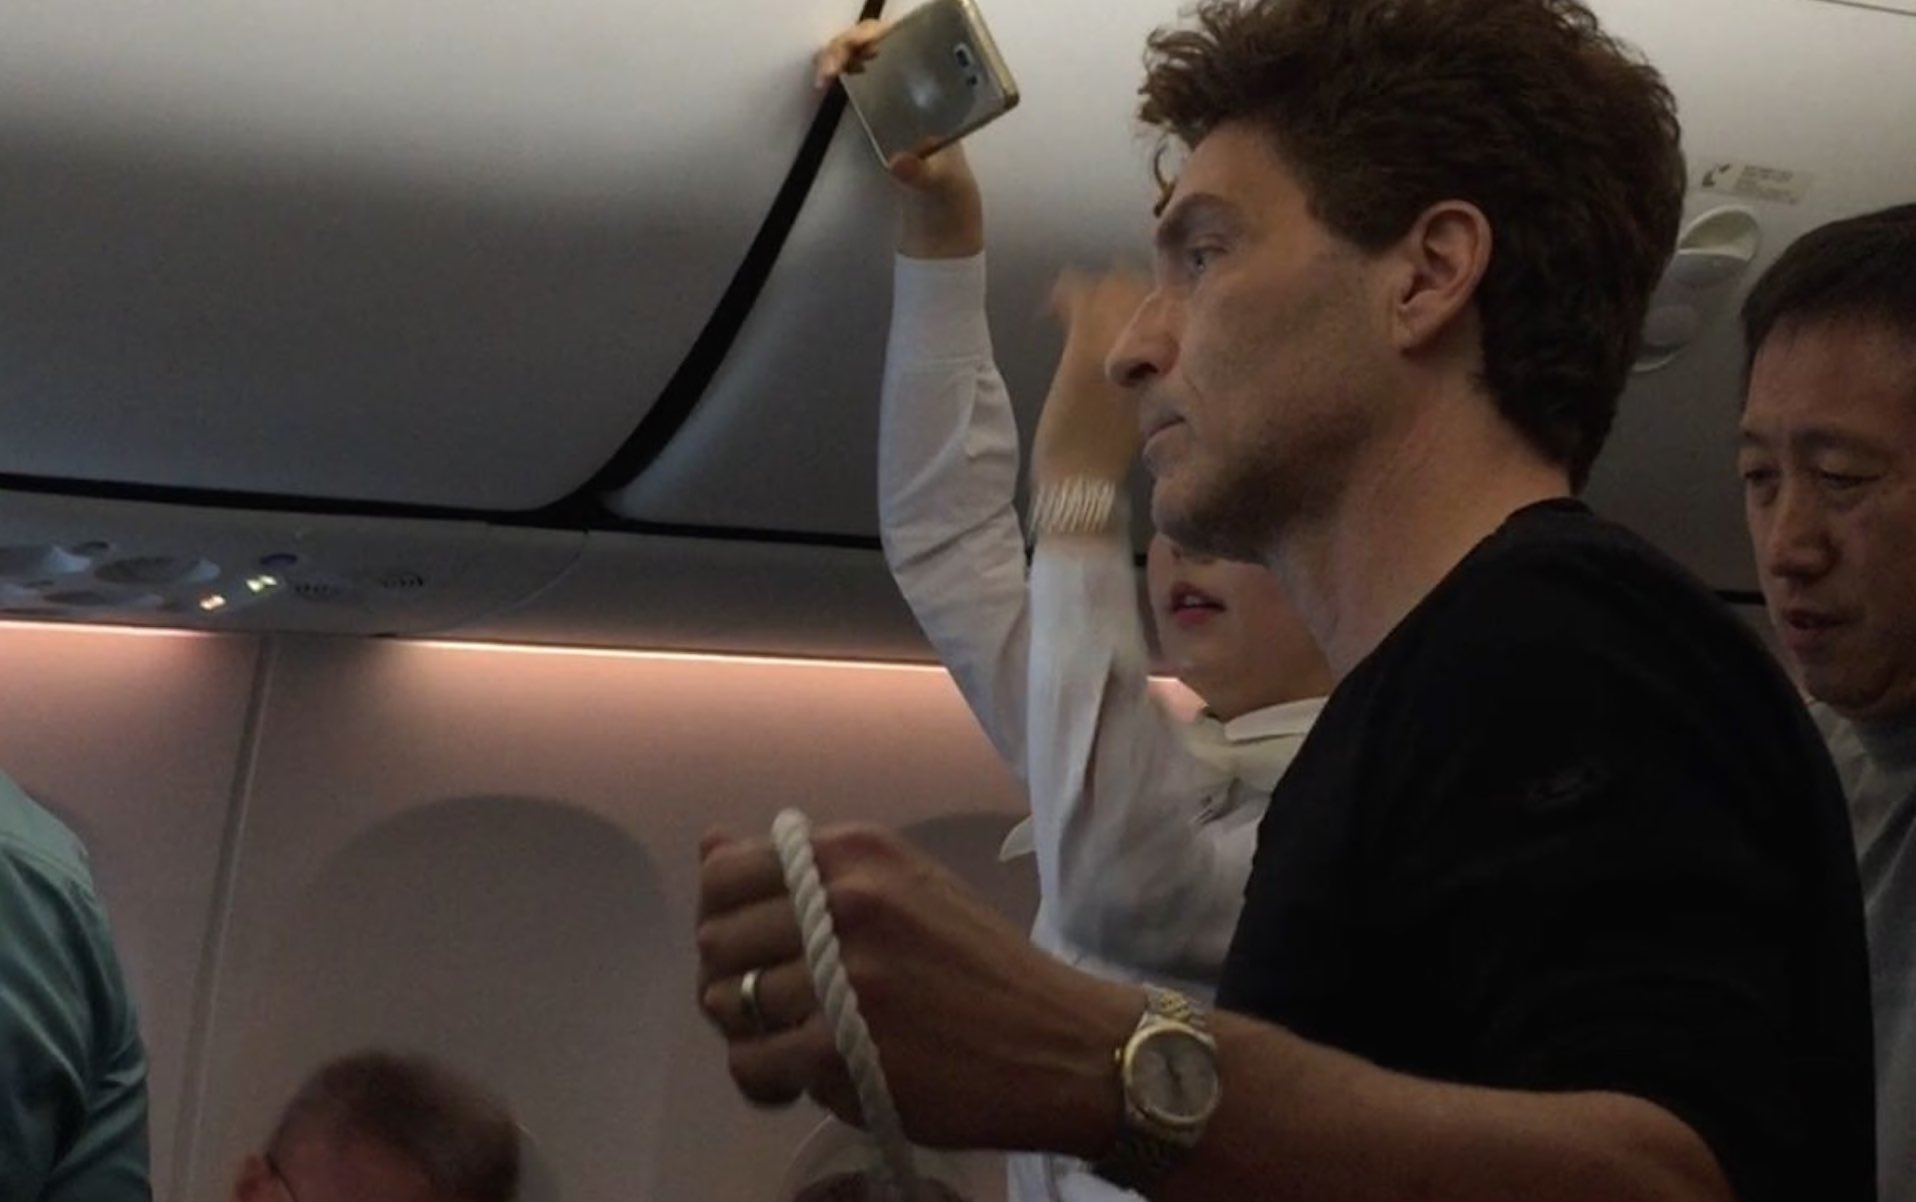 Richard Marx Subdues Unruly Passenger On An Airplane, Hopes You’d Do The Same Too